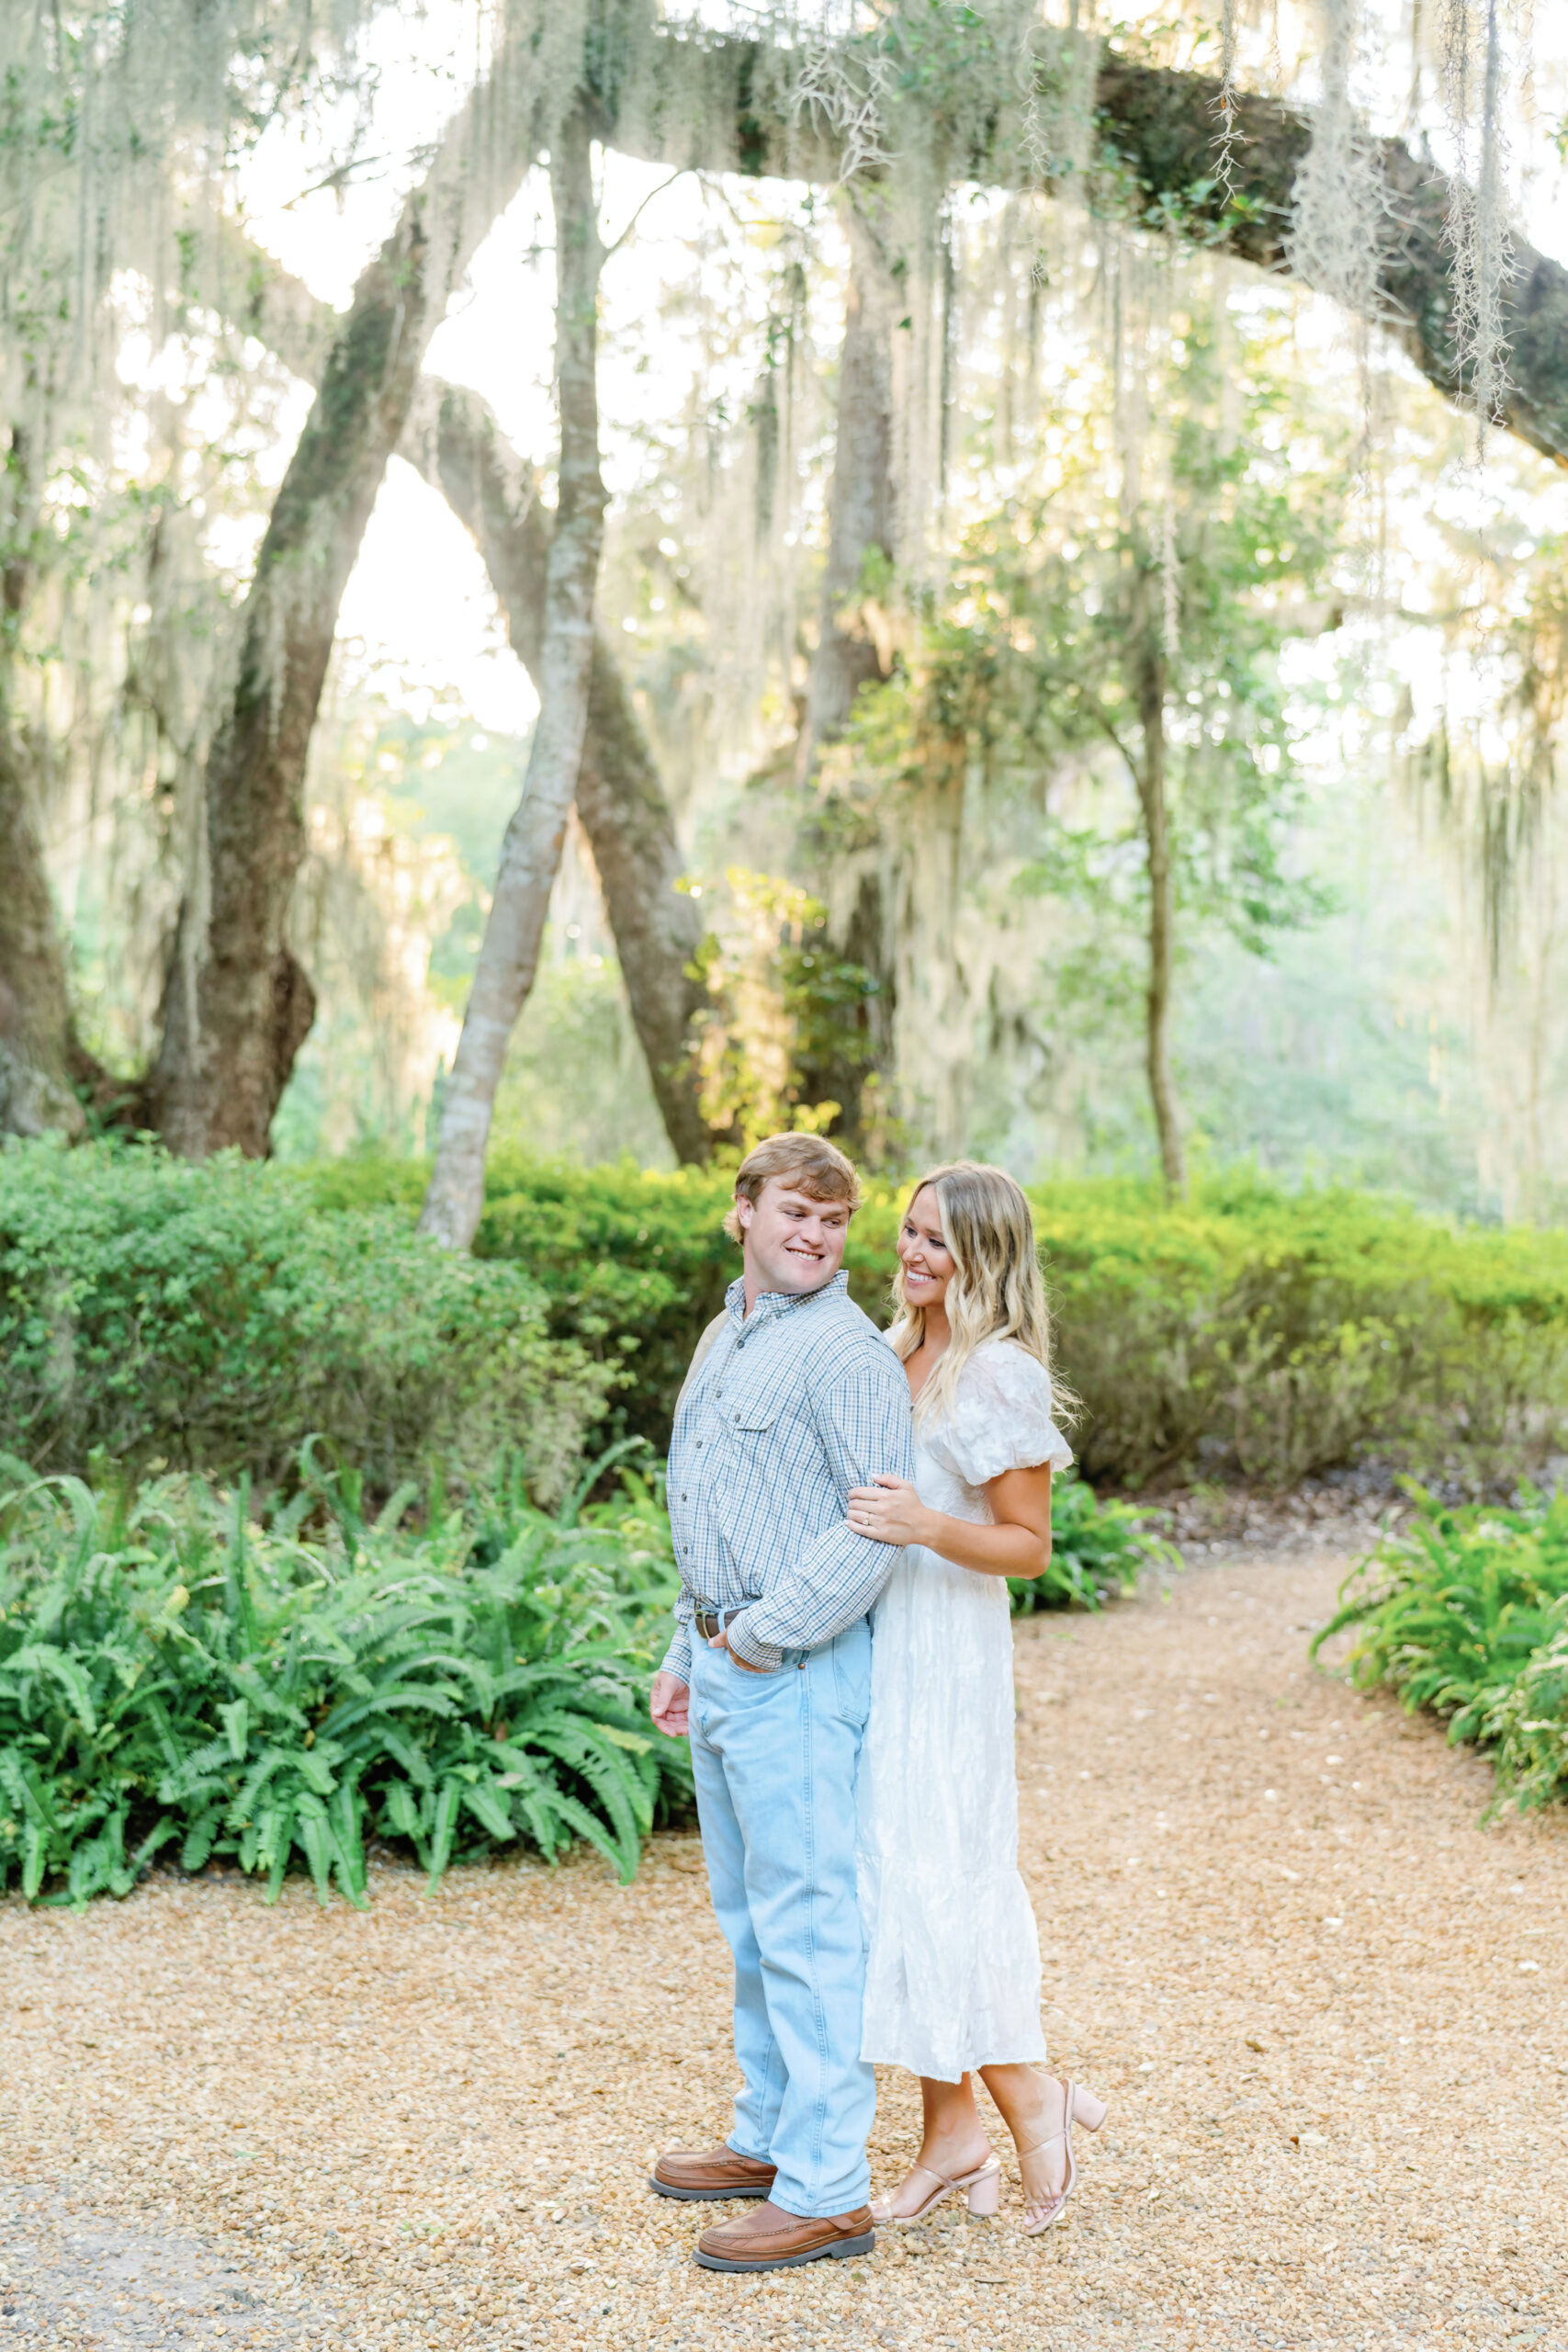 Emma and Brenley's st simons island engagement session